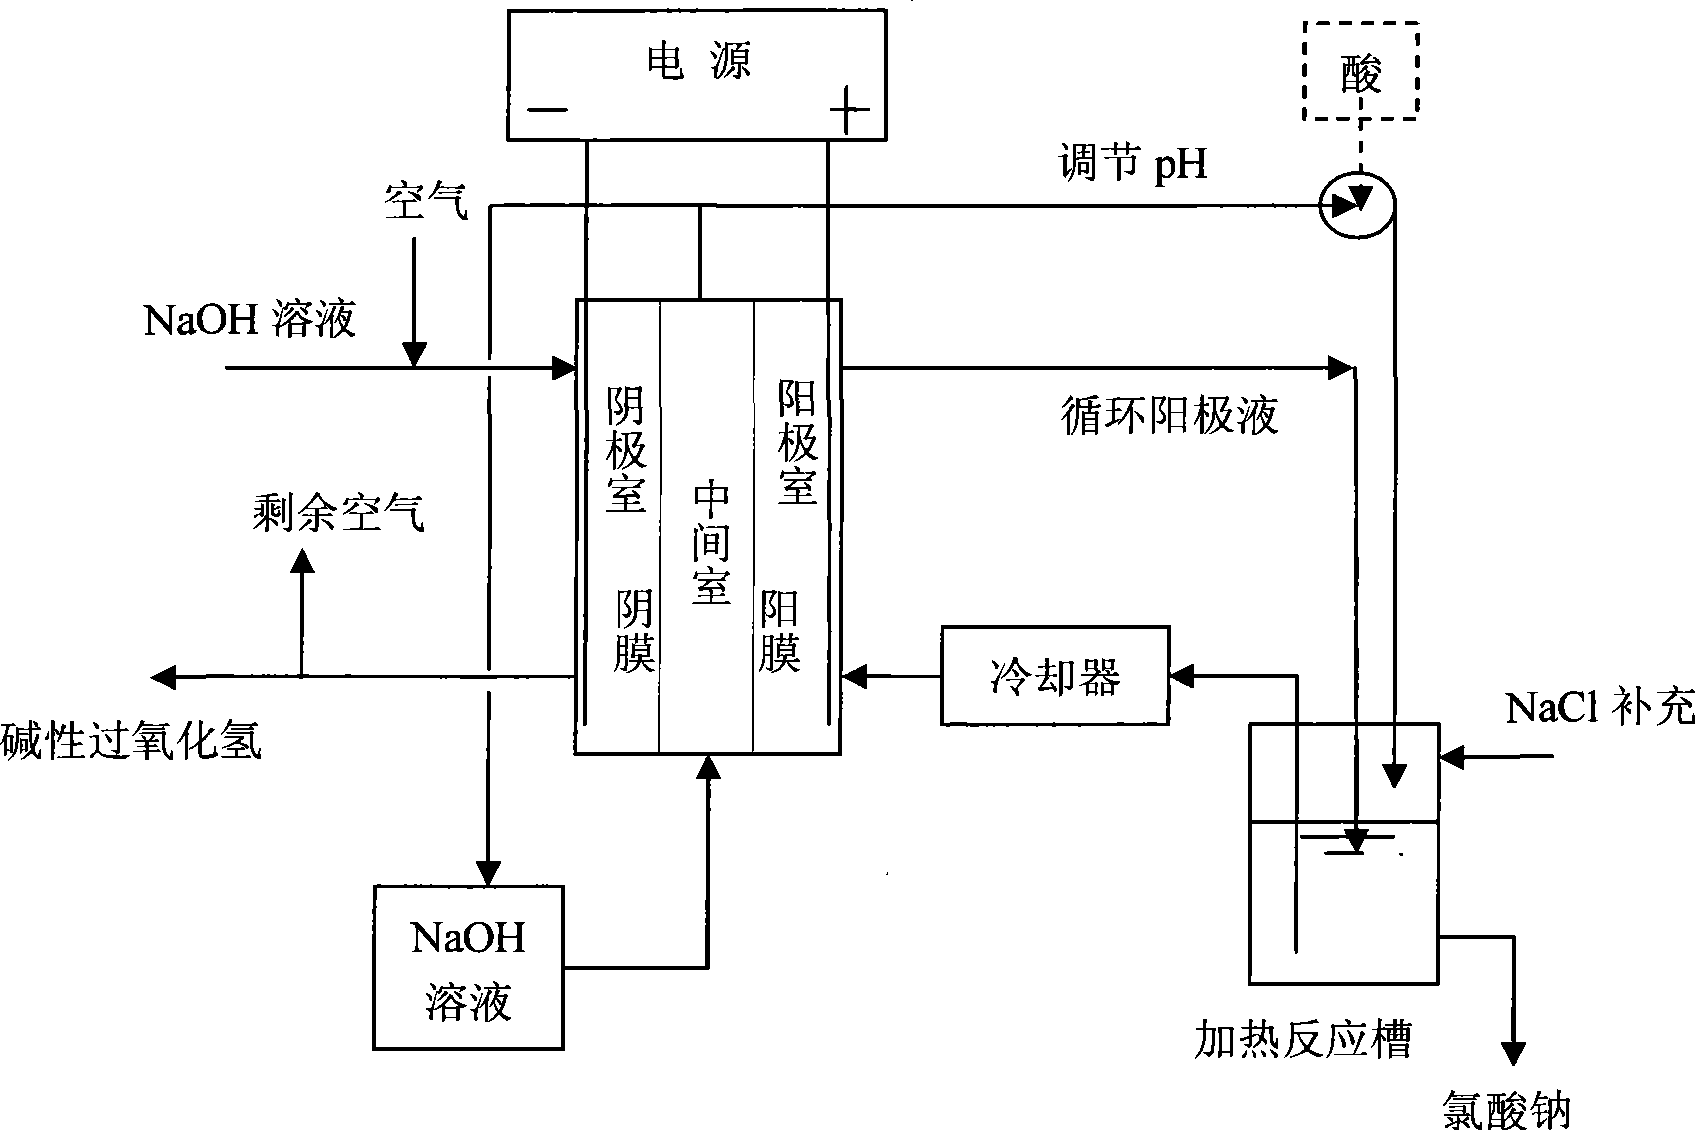 Electrochemistry method for simultaneously producing sodium chlorate and alkaline peroxide